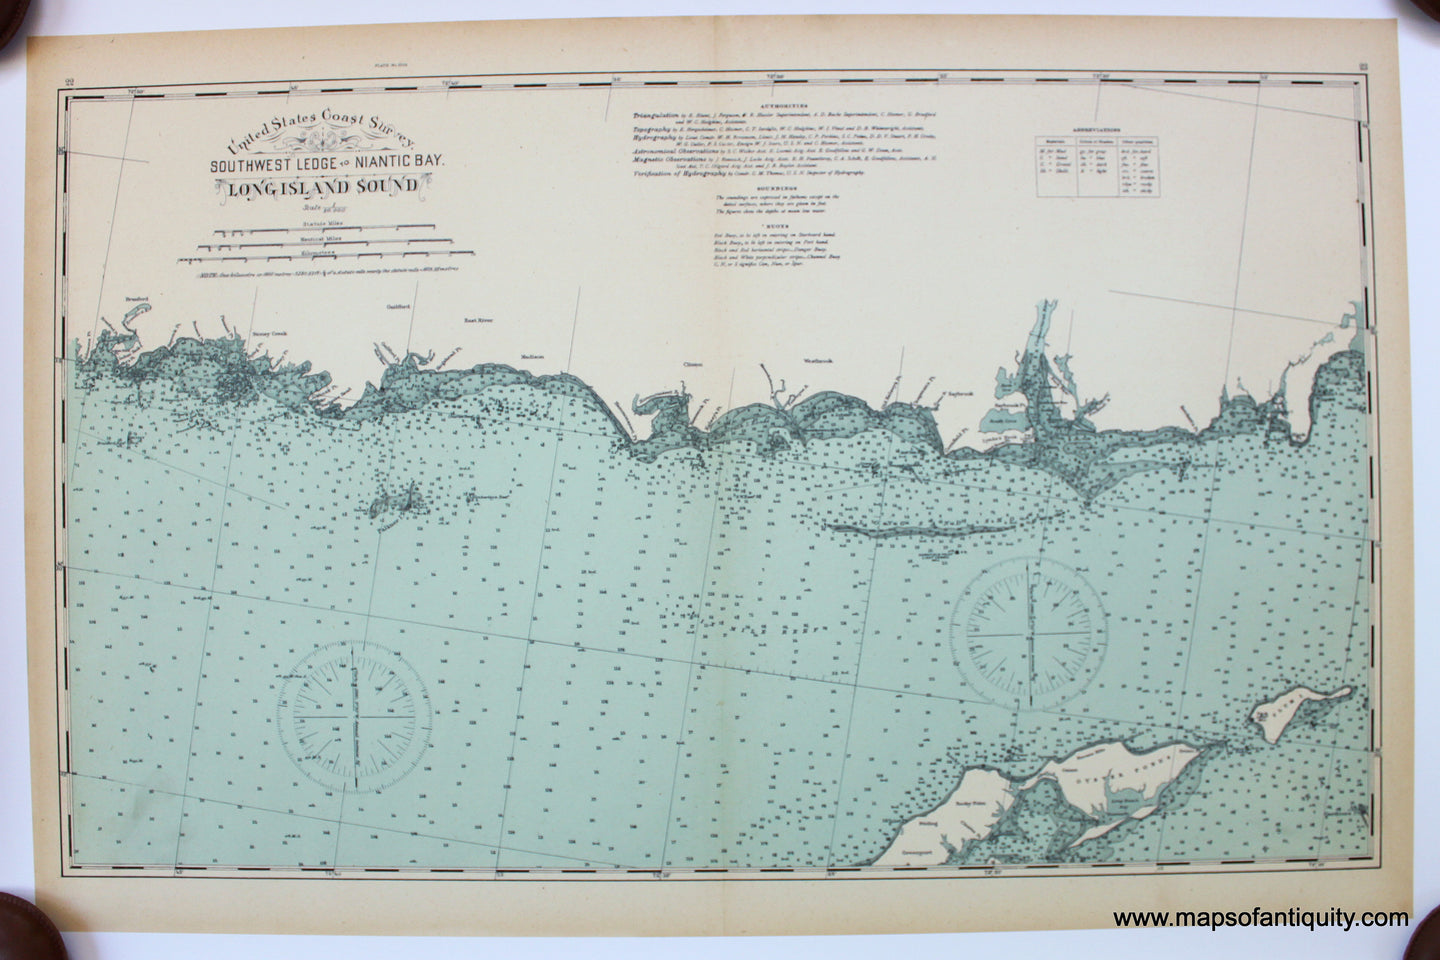 Reproduction-Reproductions-Antique-United-States-Coast-Survey-Southwest-Ledge-to-Niantic-Bay-Long-Island-Sound-Connecticut-New-York-Map-Hurd-Nautical-Chart-Charts-Maritime-Maps-of-Antiquity